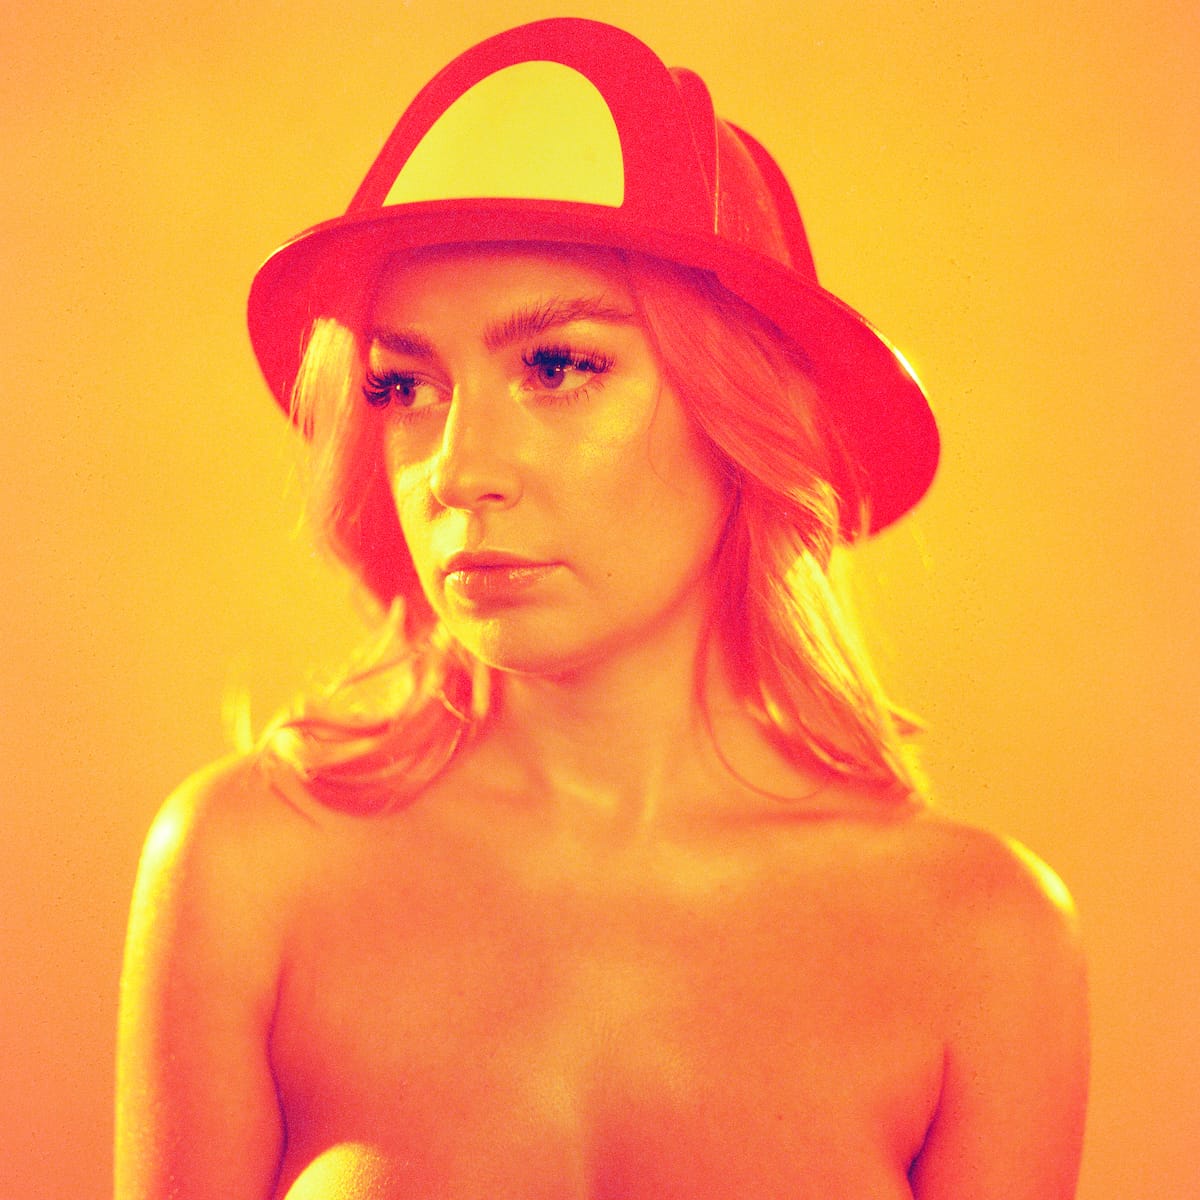 [NSFW] Revisiting Redscale by Cameran.Click